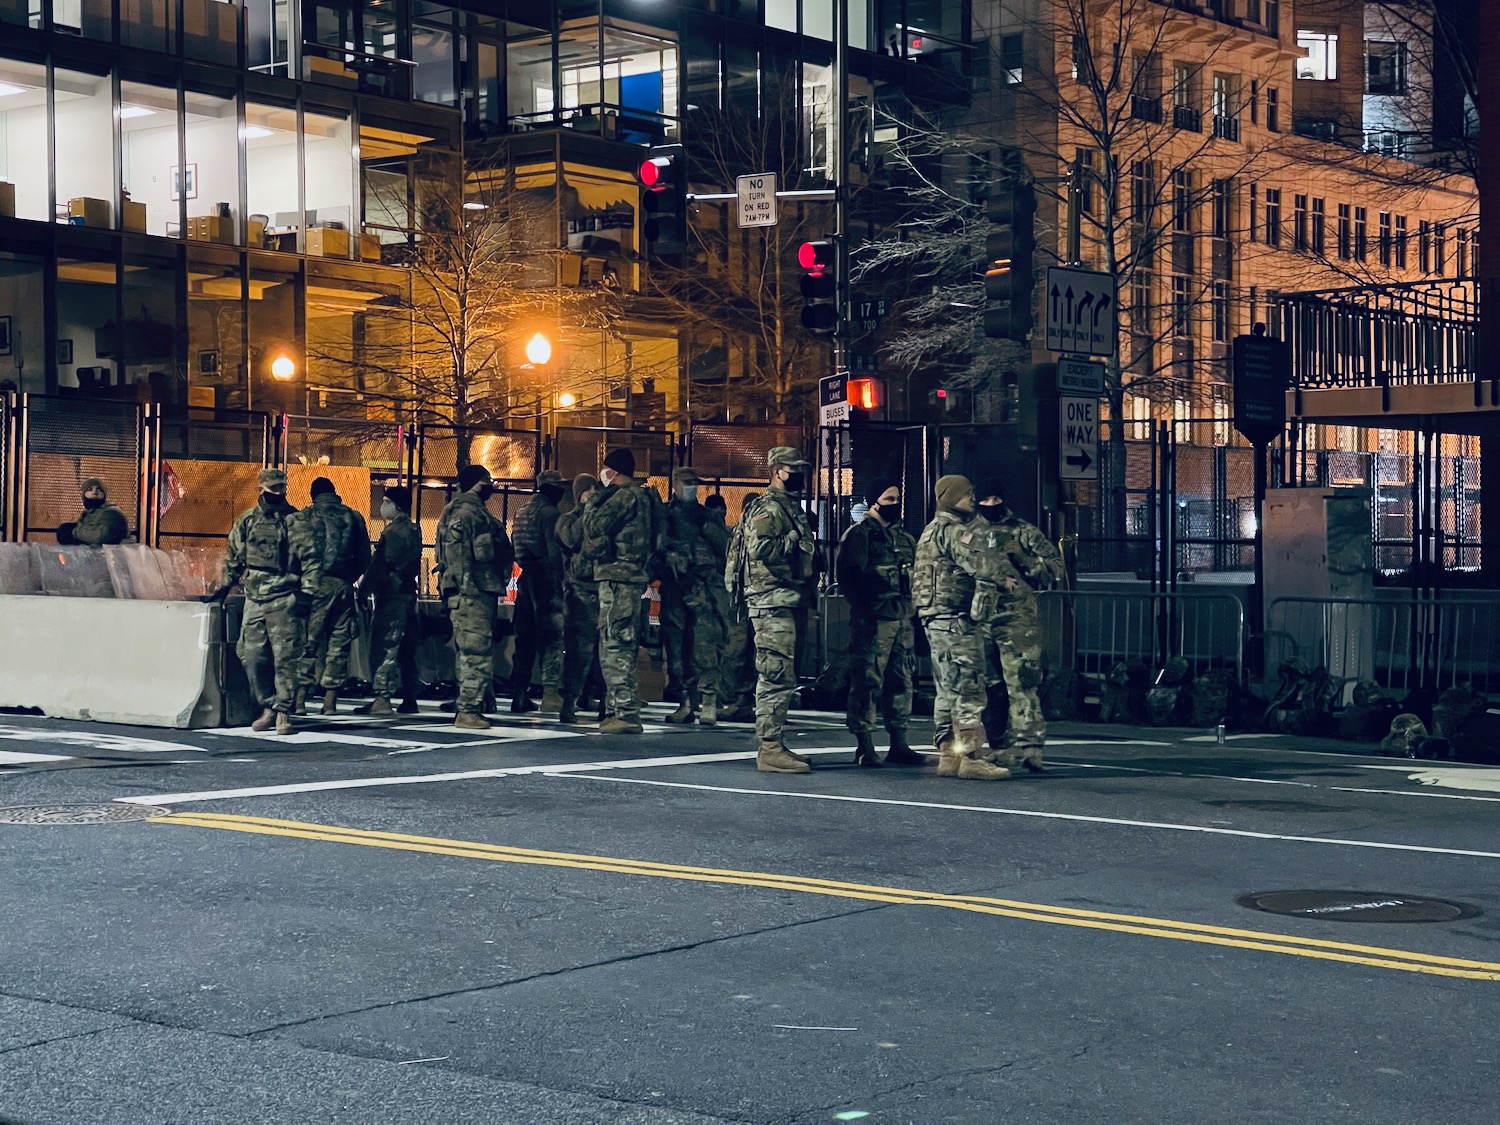 a group of people in military uniforms standing in a line on a street